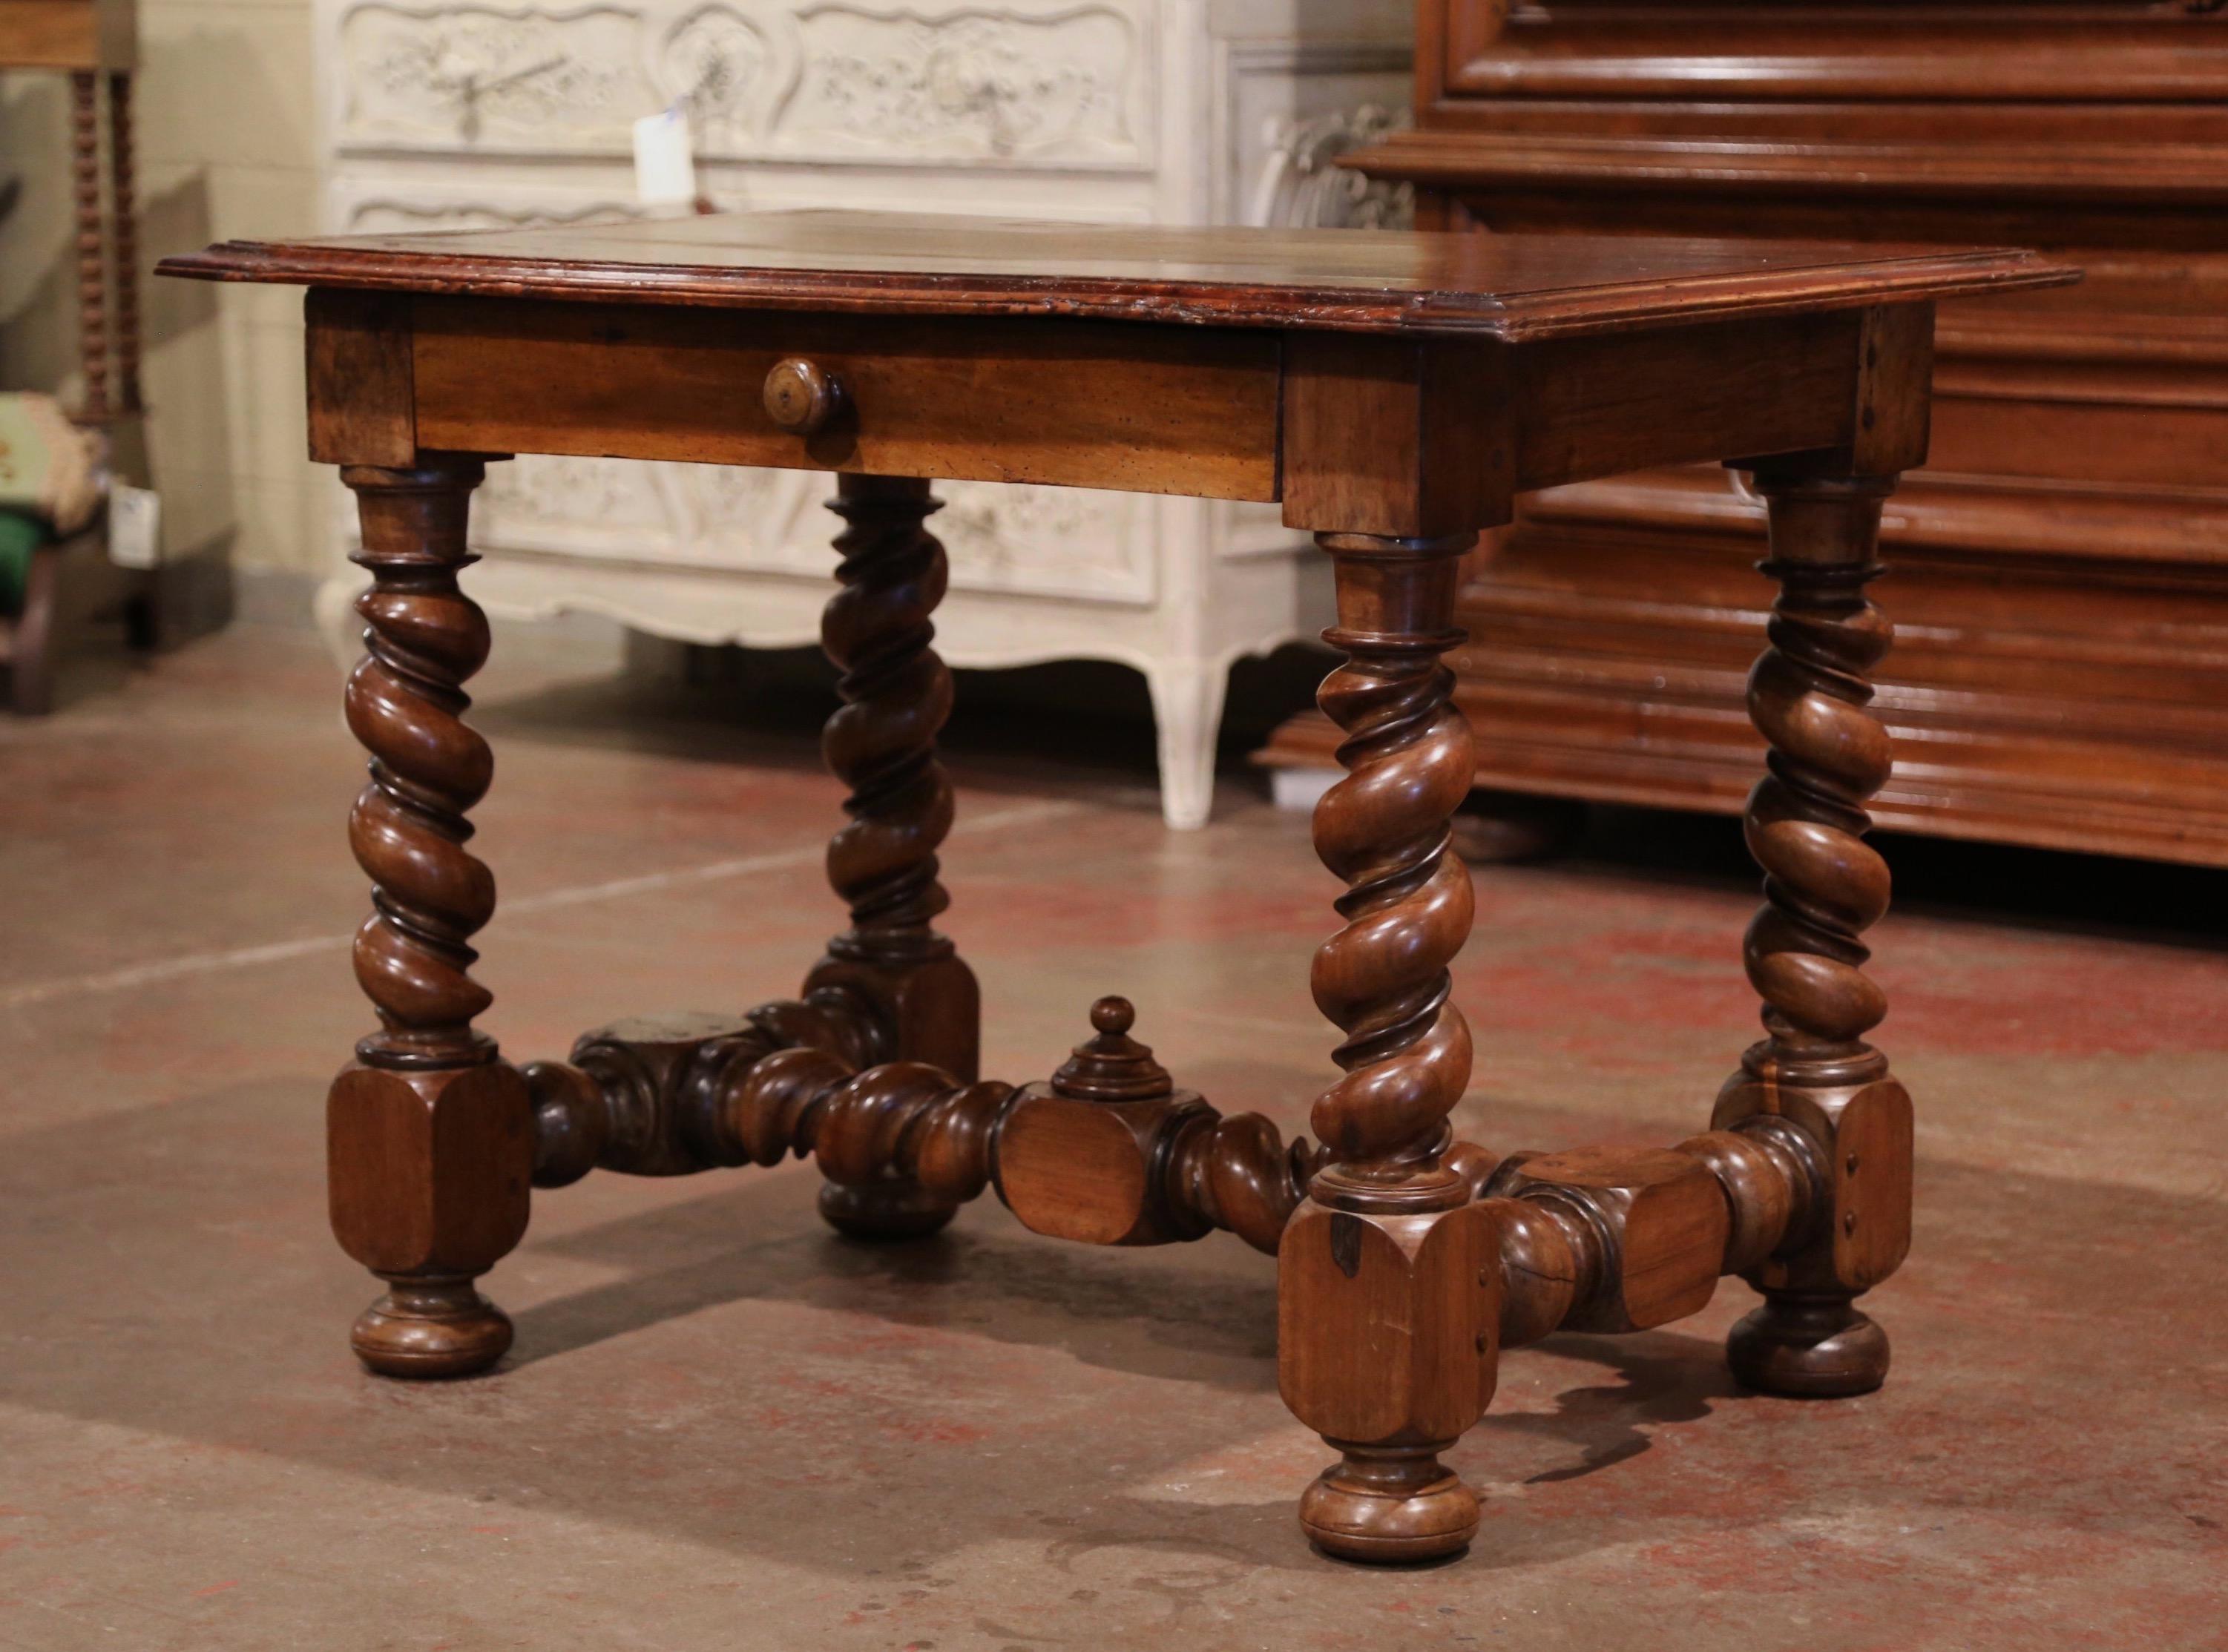 Incorporate extra, functional surface space into your living room or den with this elegant antique table. Crafted in the Perigord region of France, circa 1850, the side table stands on thick barley twist legs ending with bun feet, embellished with a